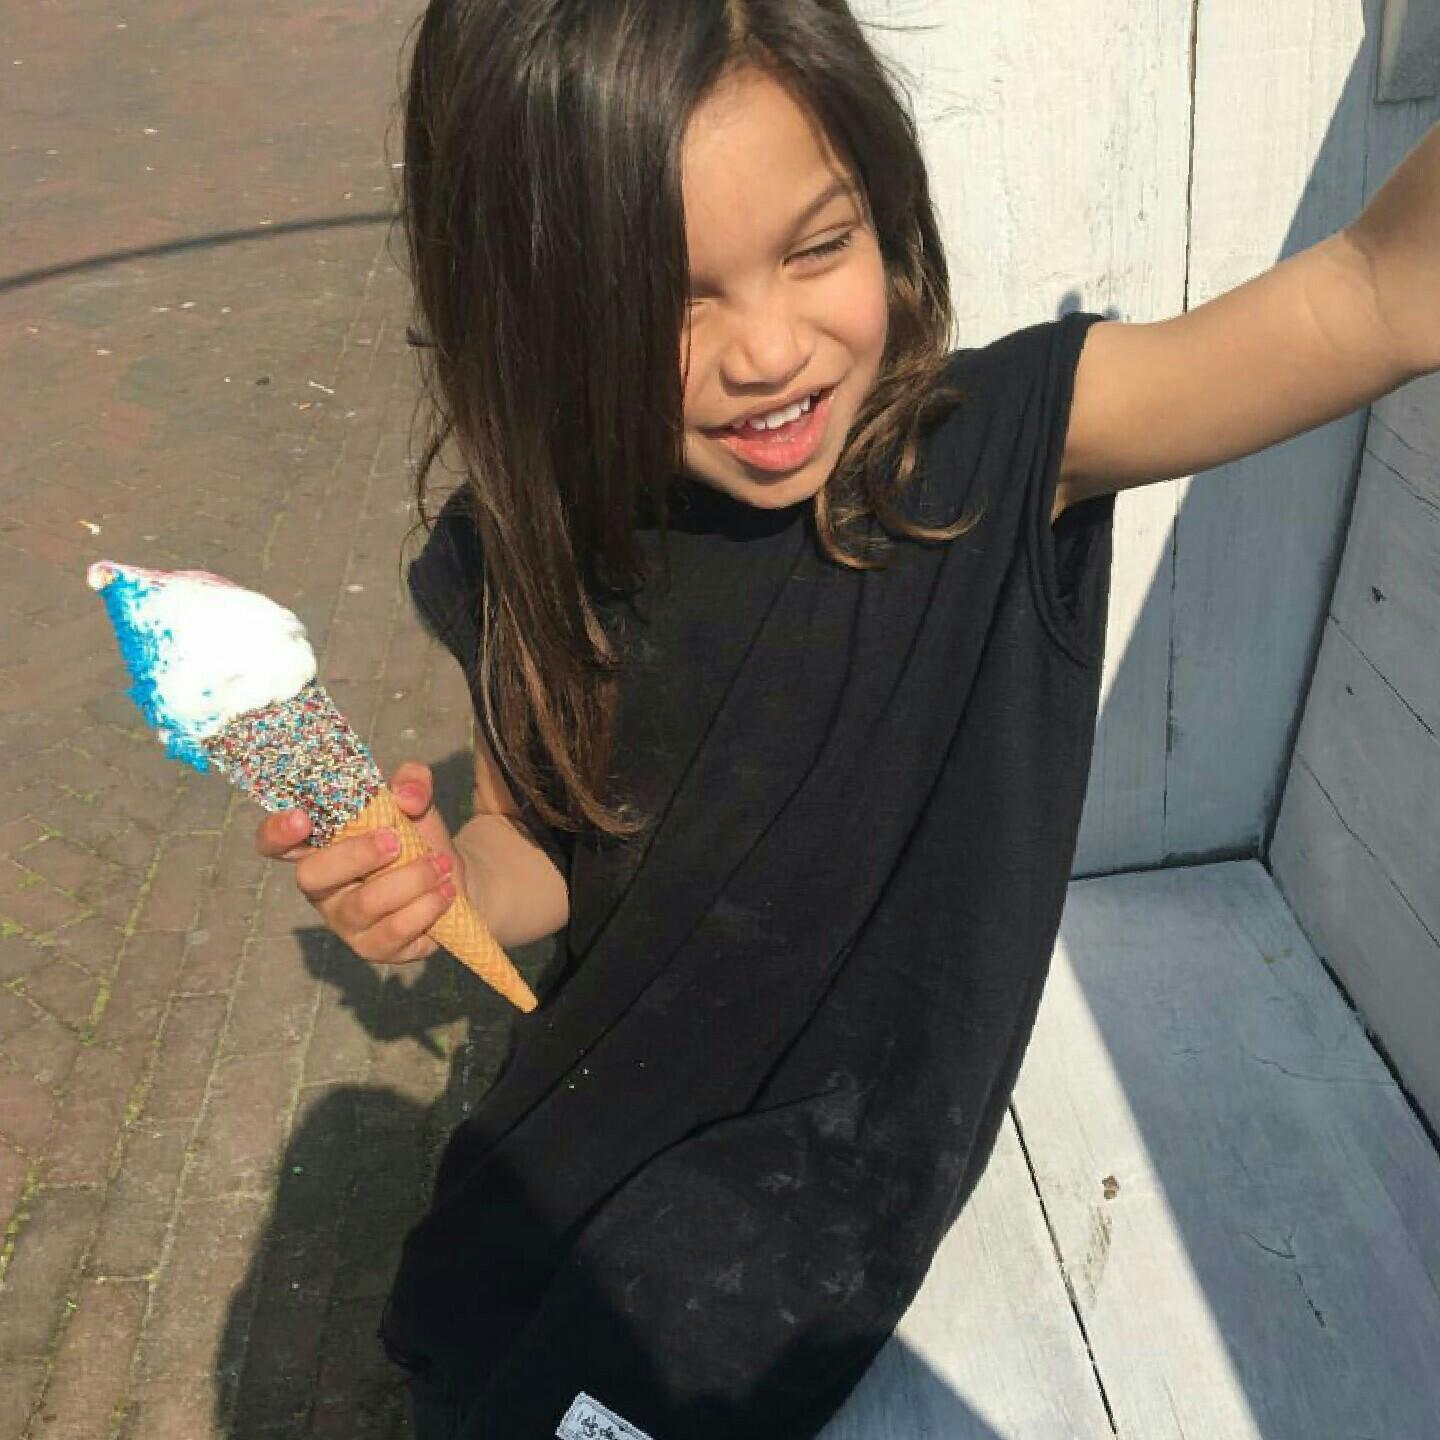 She had me drooling while eating that ice cream! 